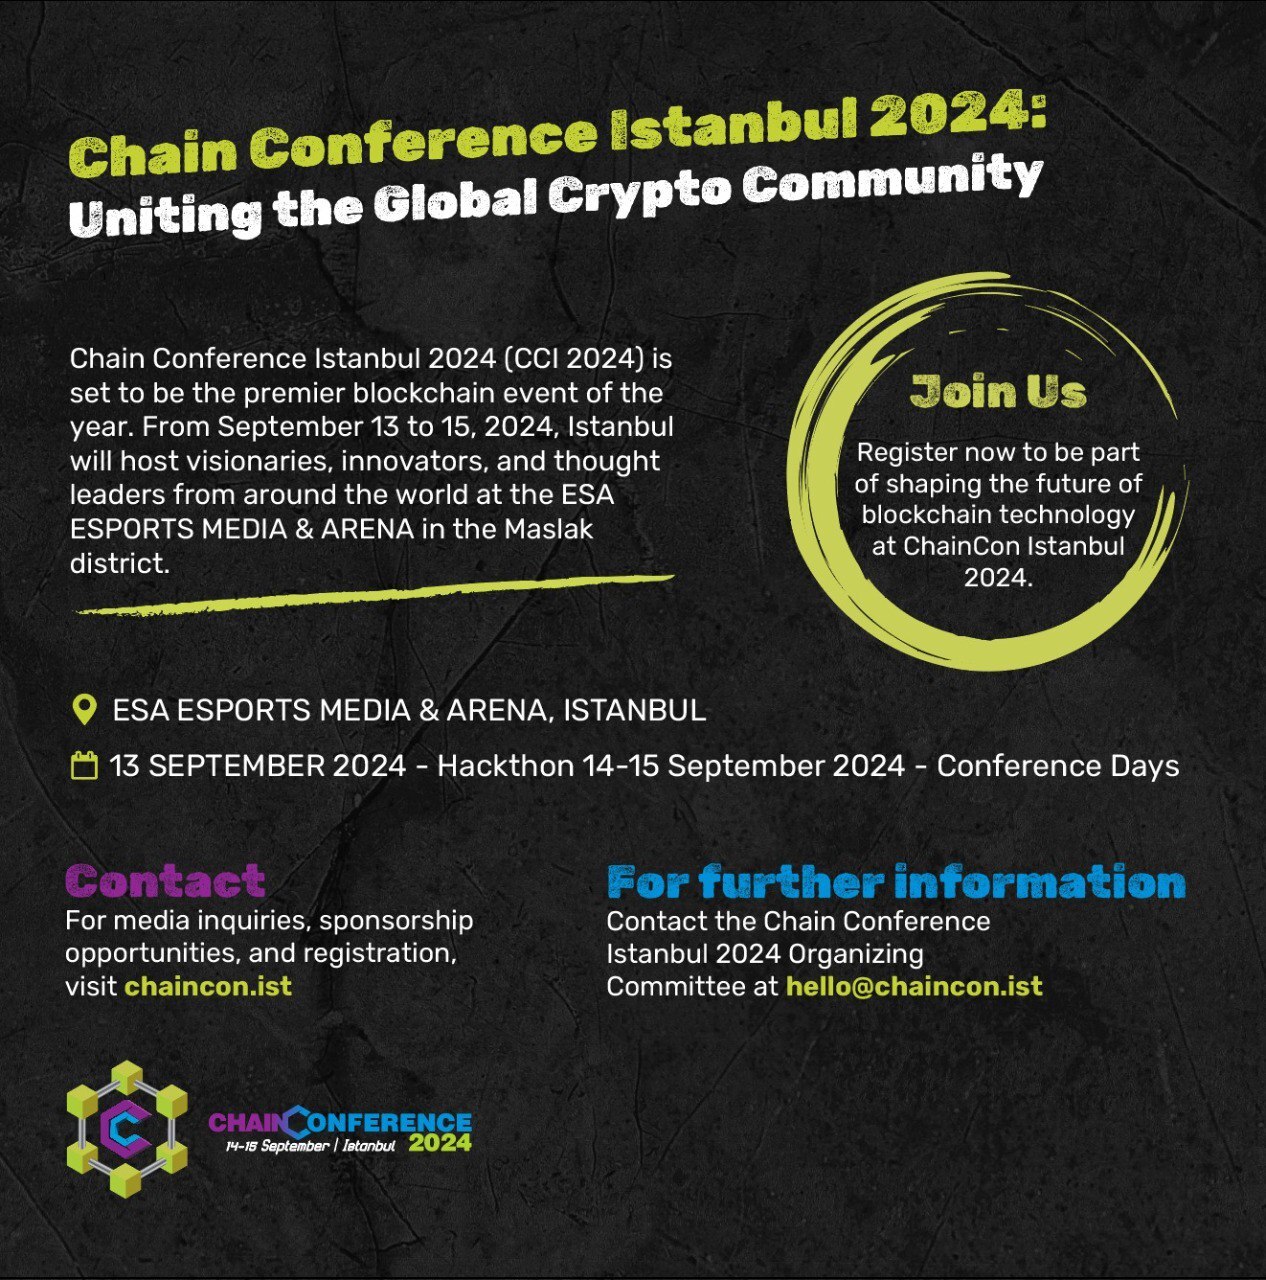 Chain Conference Istanbul 2024: Uniting the Global Crypto Community